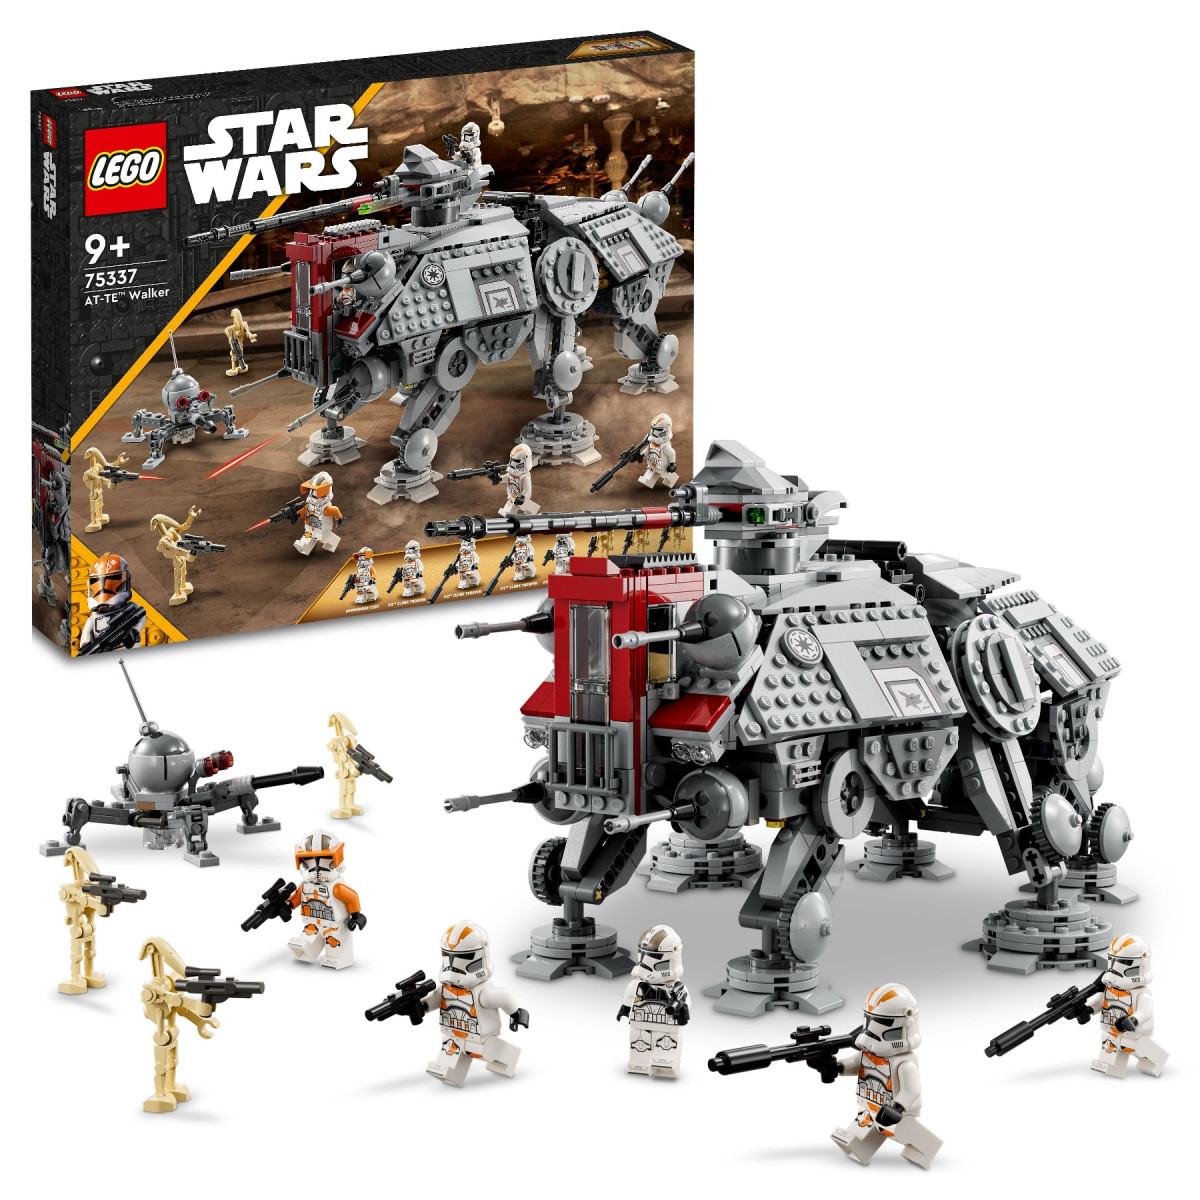 LEGO Star Wars AT-TE Walker Buildable Toy 75337